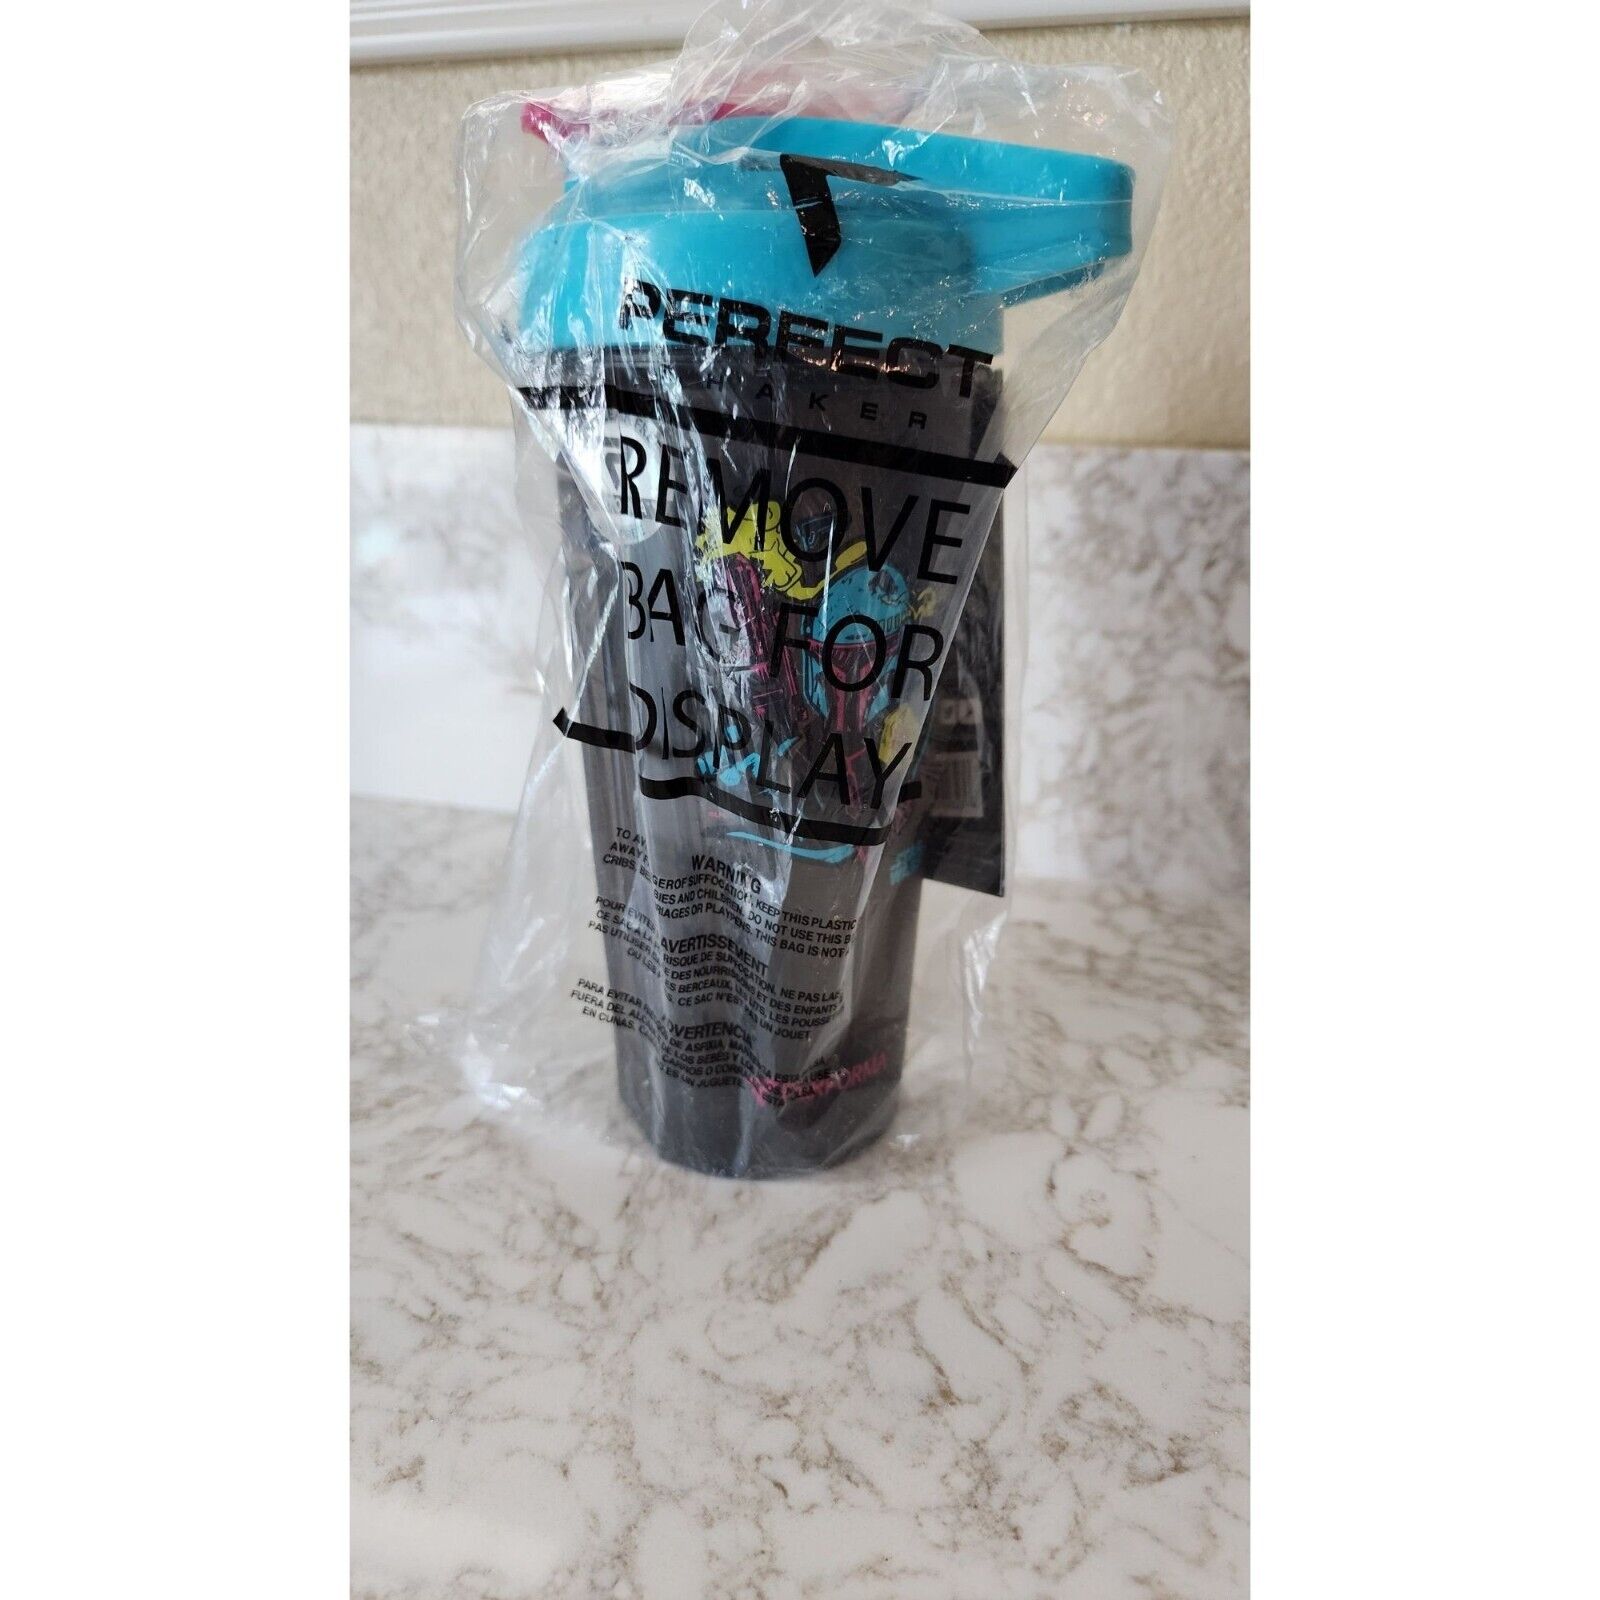 PerfectShaker Boba Fett Shaker Never Opened SDCC 2019 ComicCon exclusive NWT